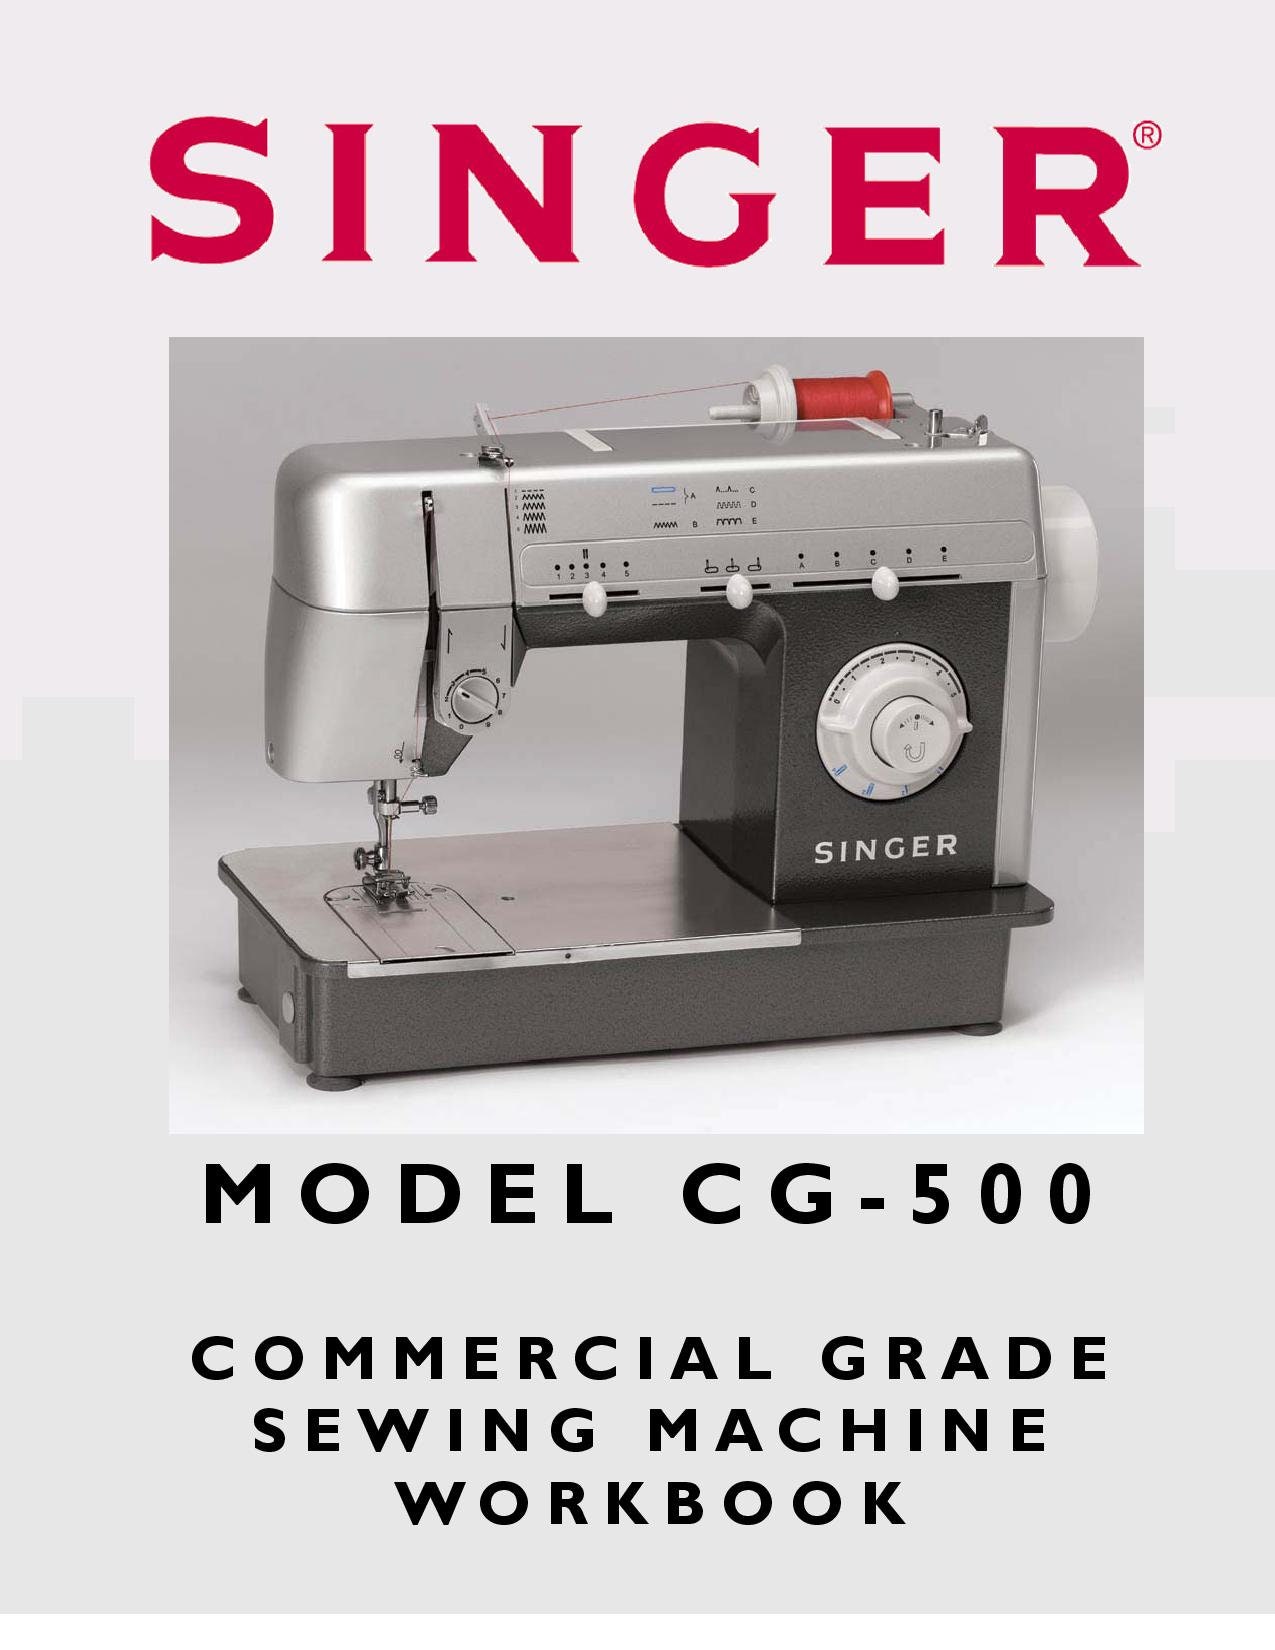 Singer C7250 Computerized Sewing Machine